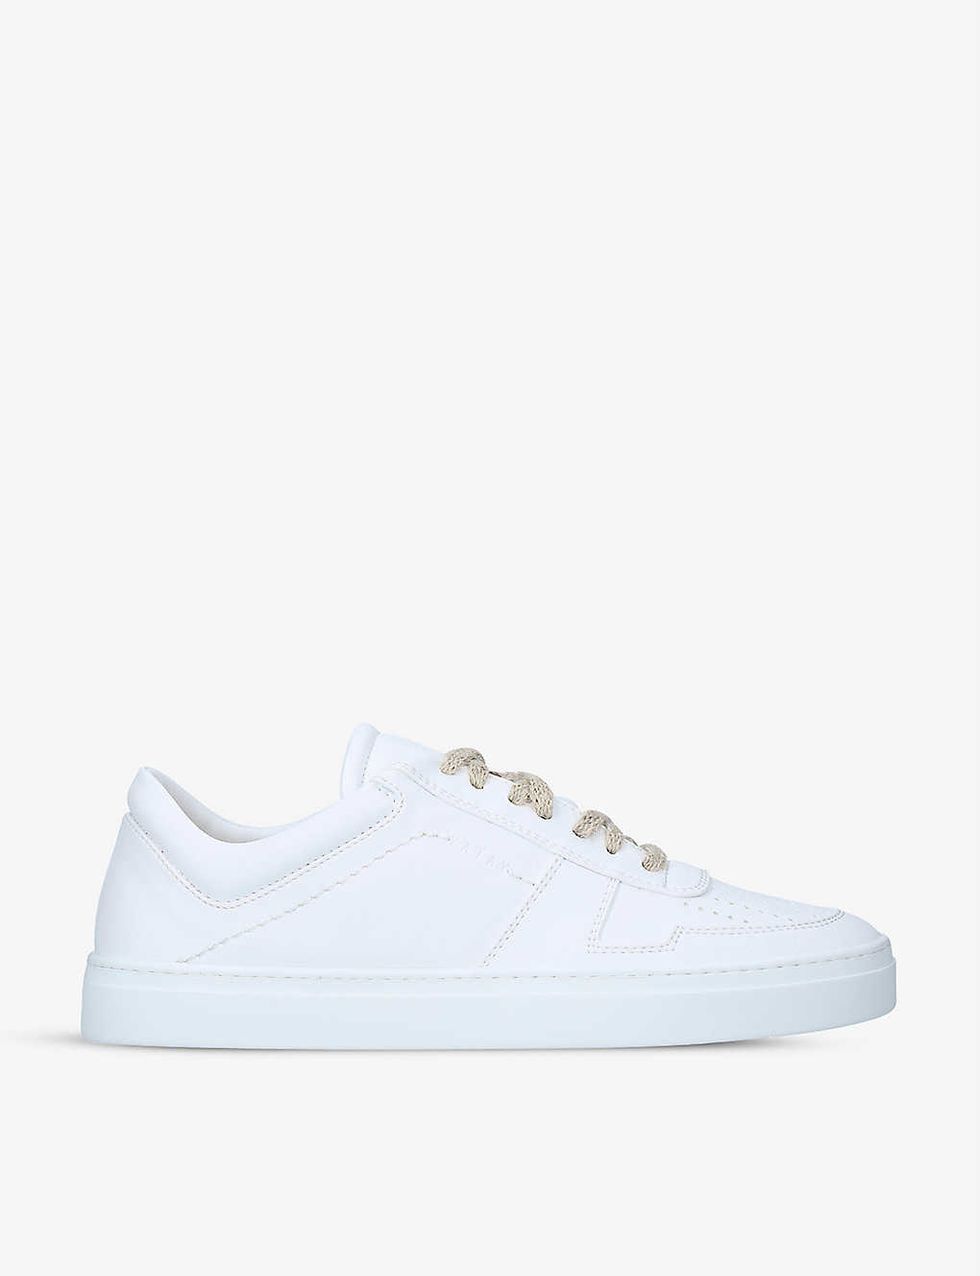 23 Best White Trainers You Need In Your Wardrobe 2021